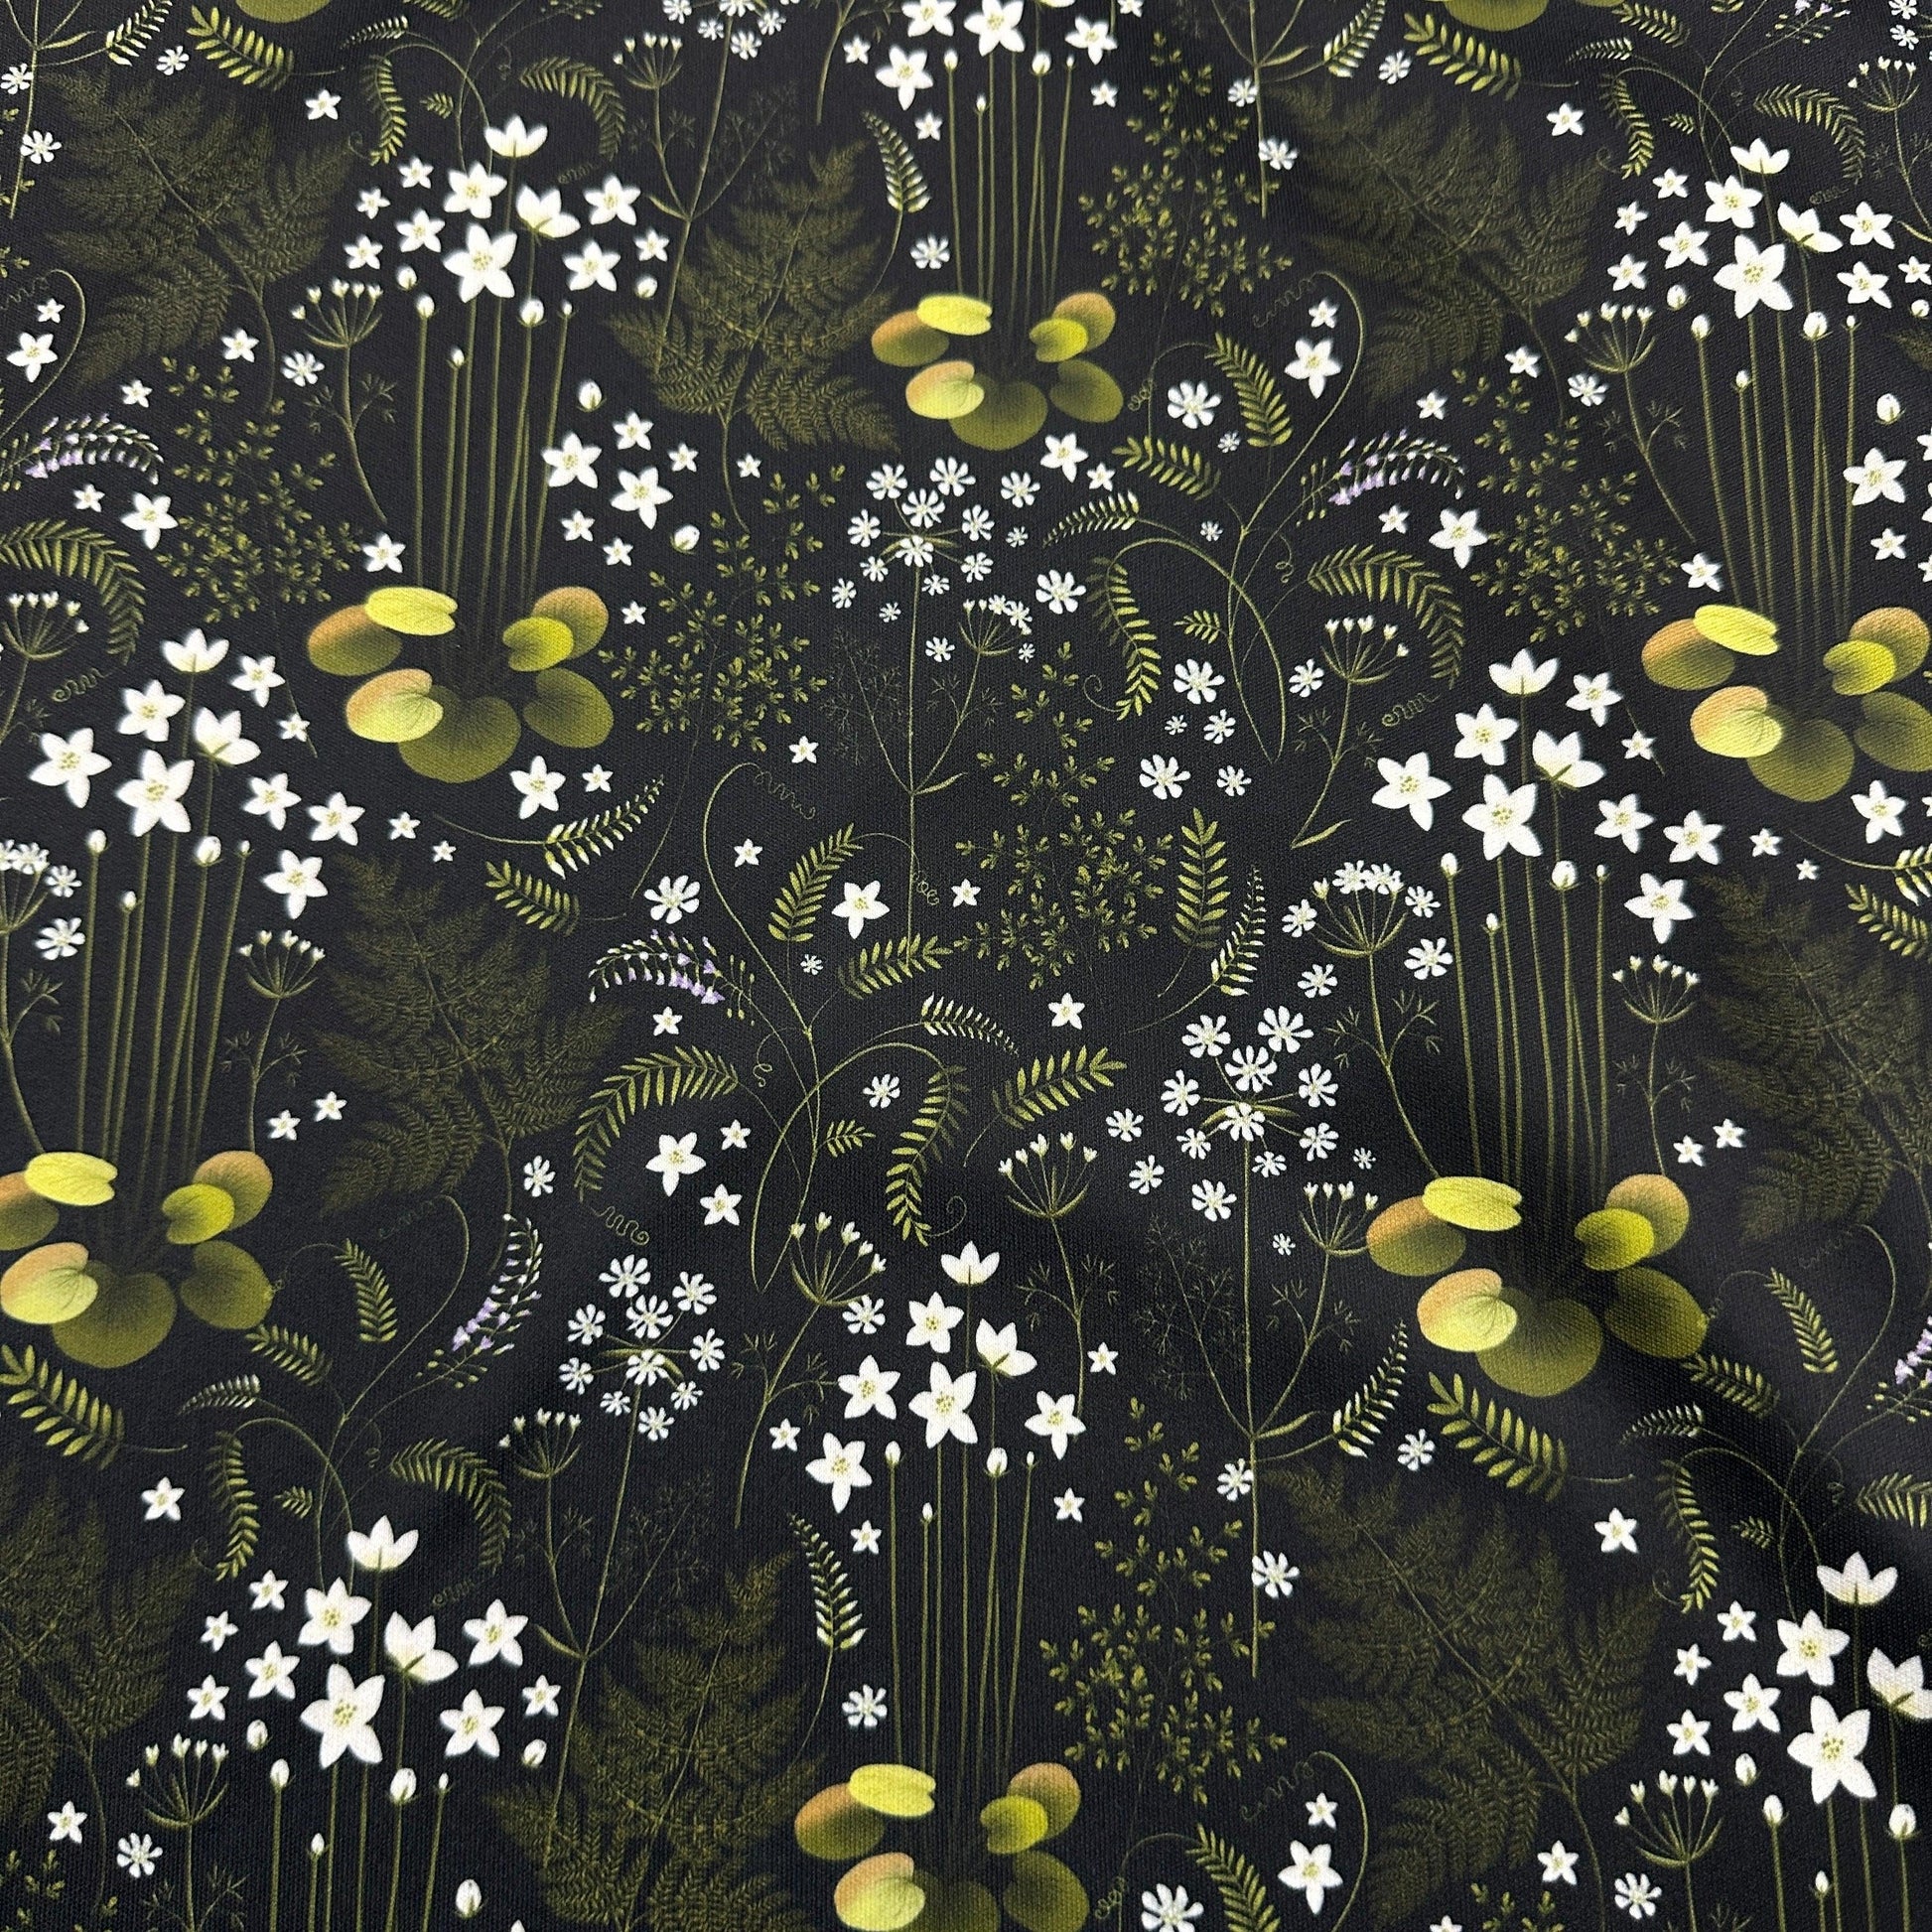 Ferns on Black 1 mil PUL Fabric - Made in the USA - Nature's Fabrics